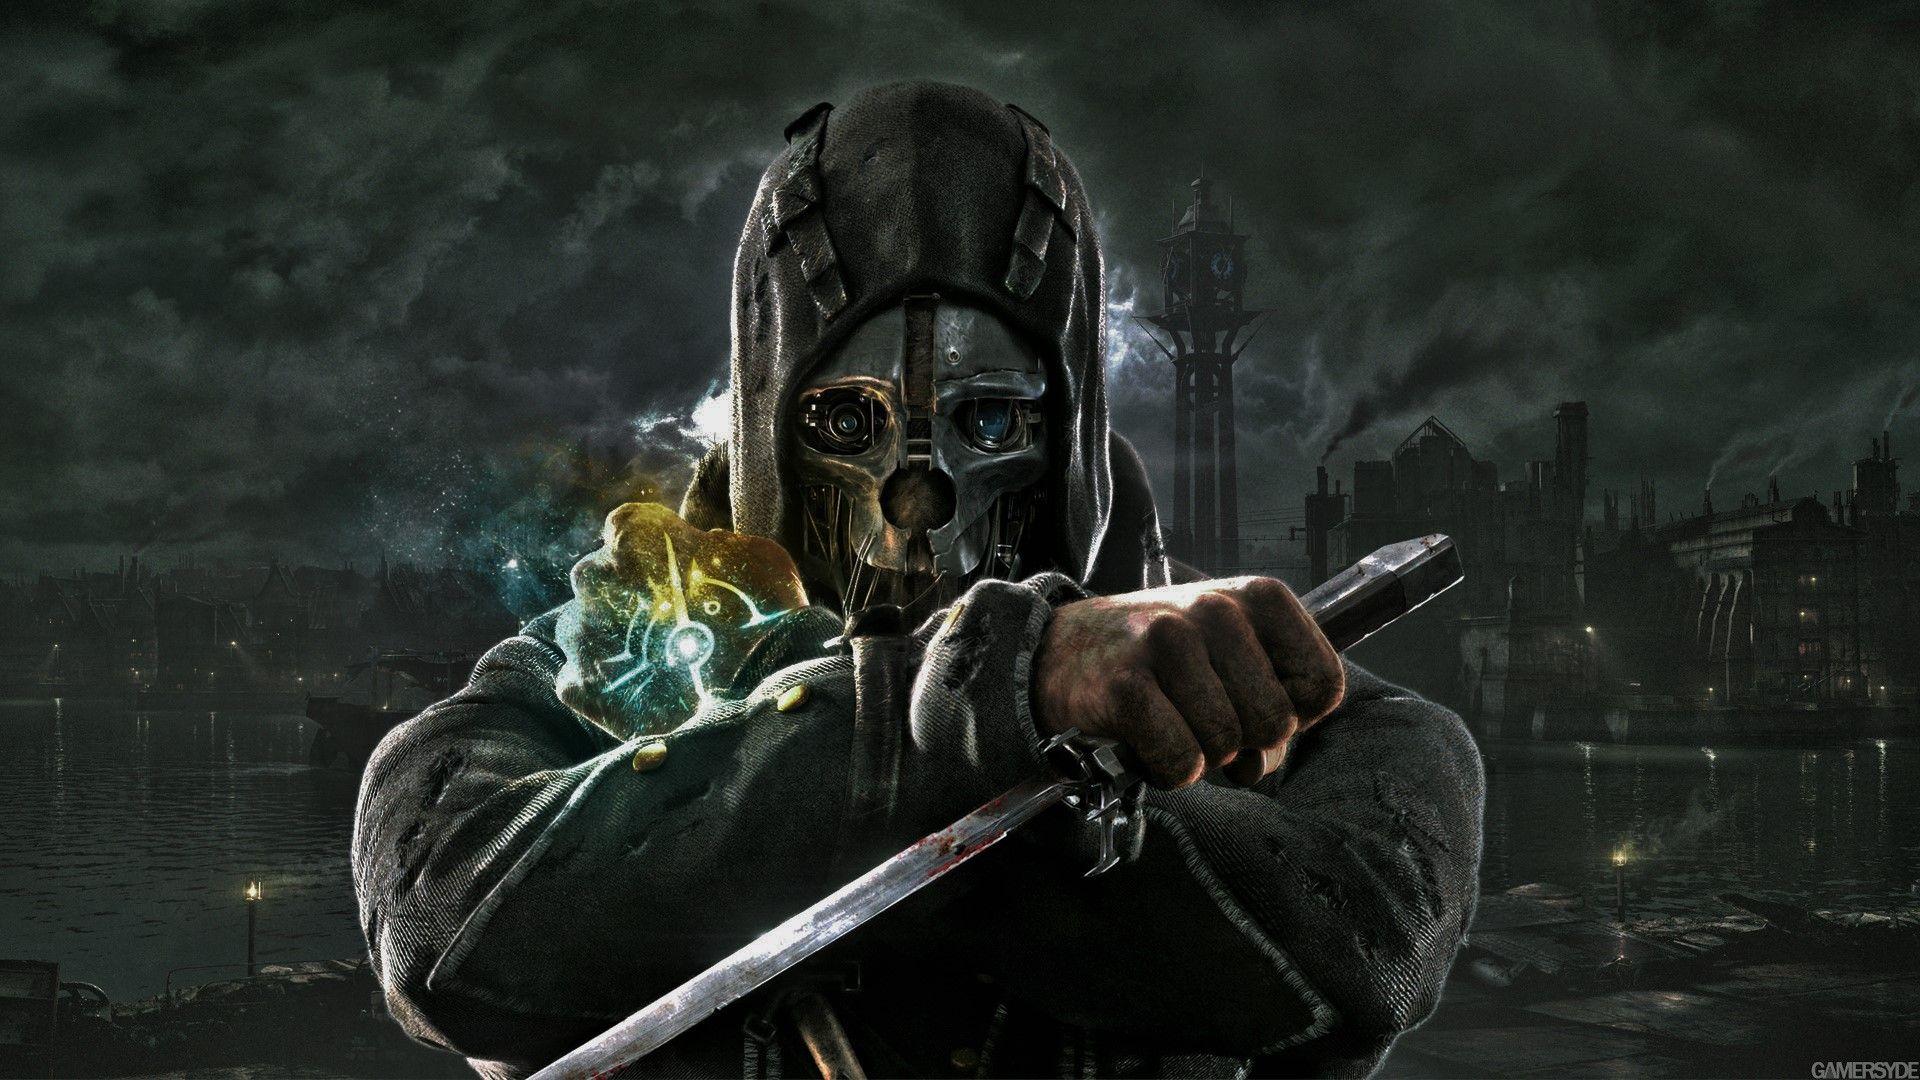 100+] Dishonored Wallpapers | Wallpapers.com